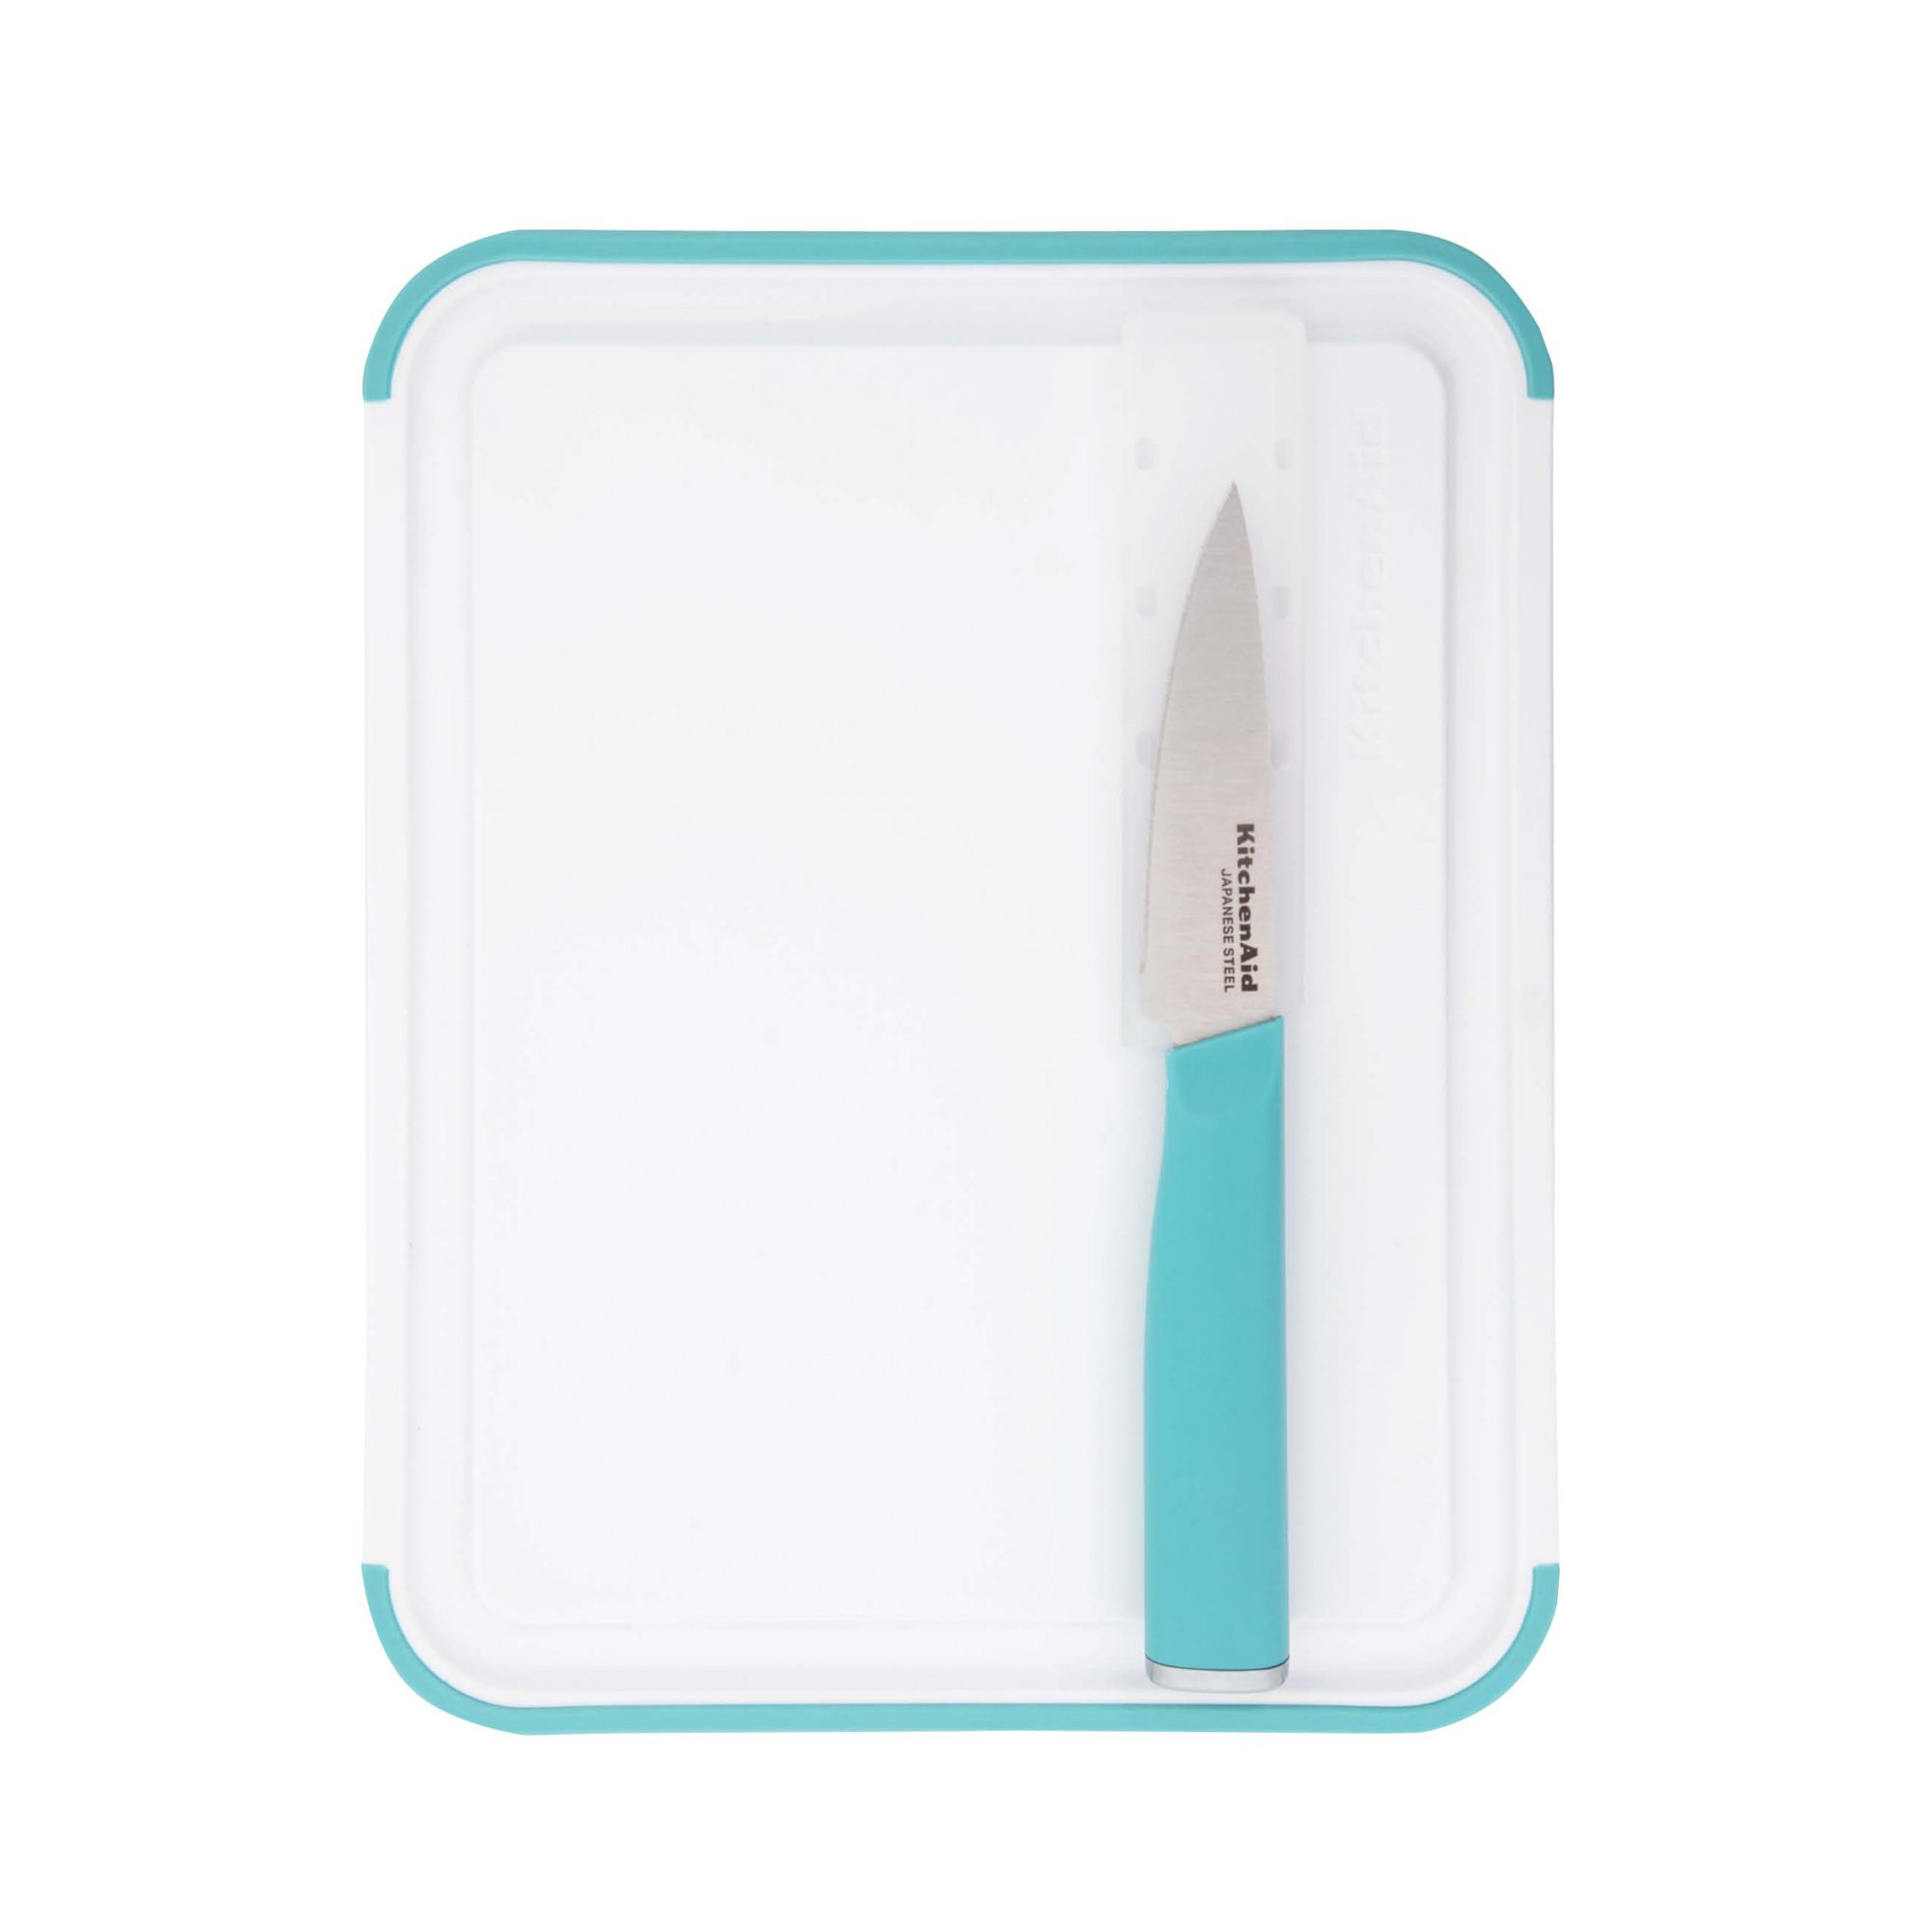 KitchenAid Classic 3.5 Paring Knife with Cutting Board